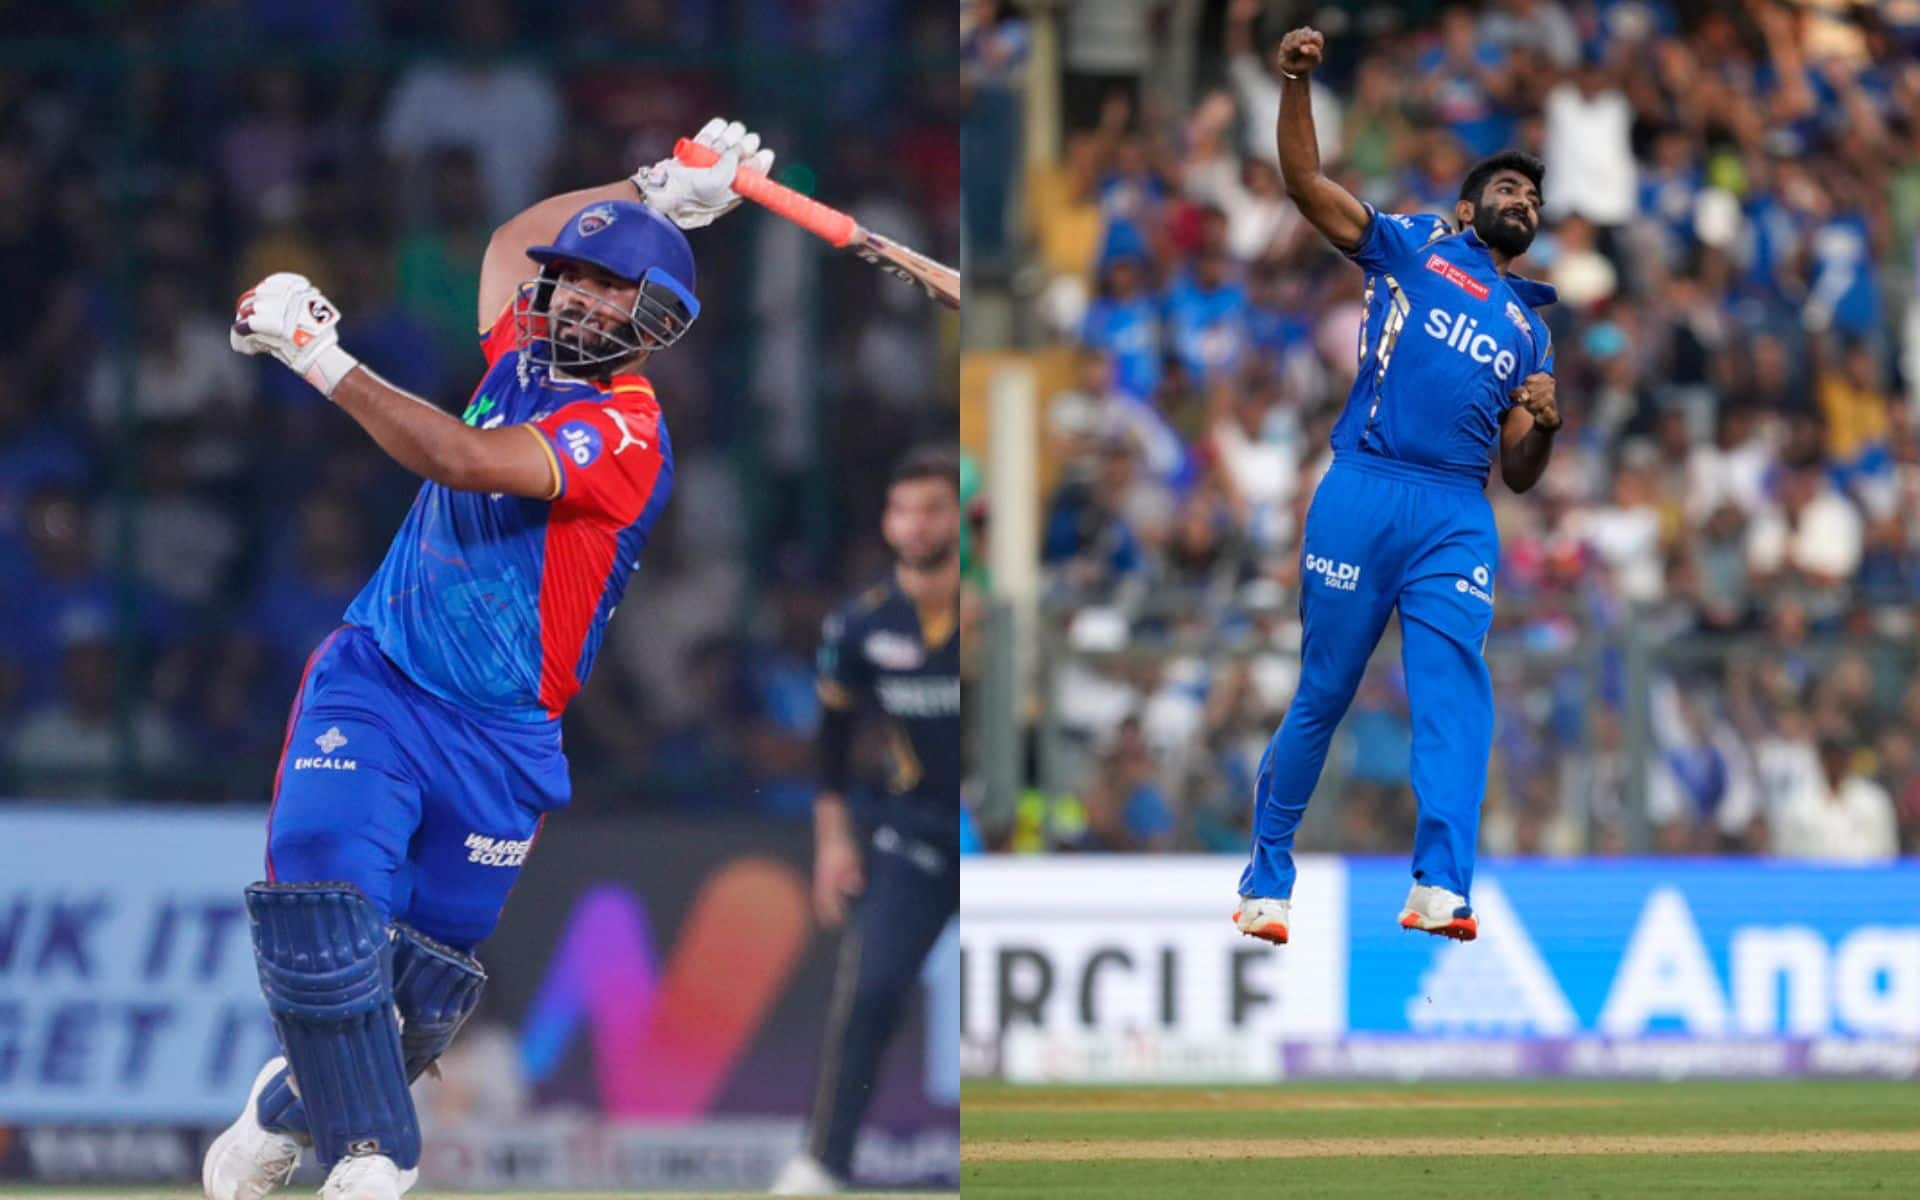 Rishabh Pant and Jasprit Bumrah would be crucial for their teams in the game [AP Photos]